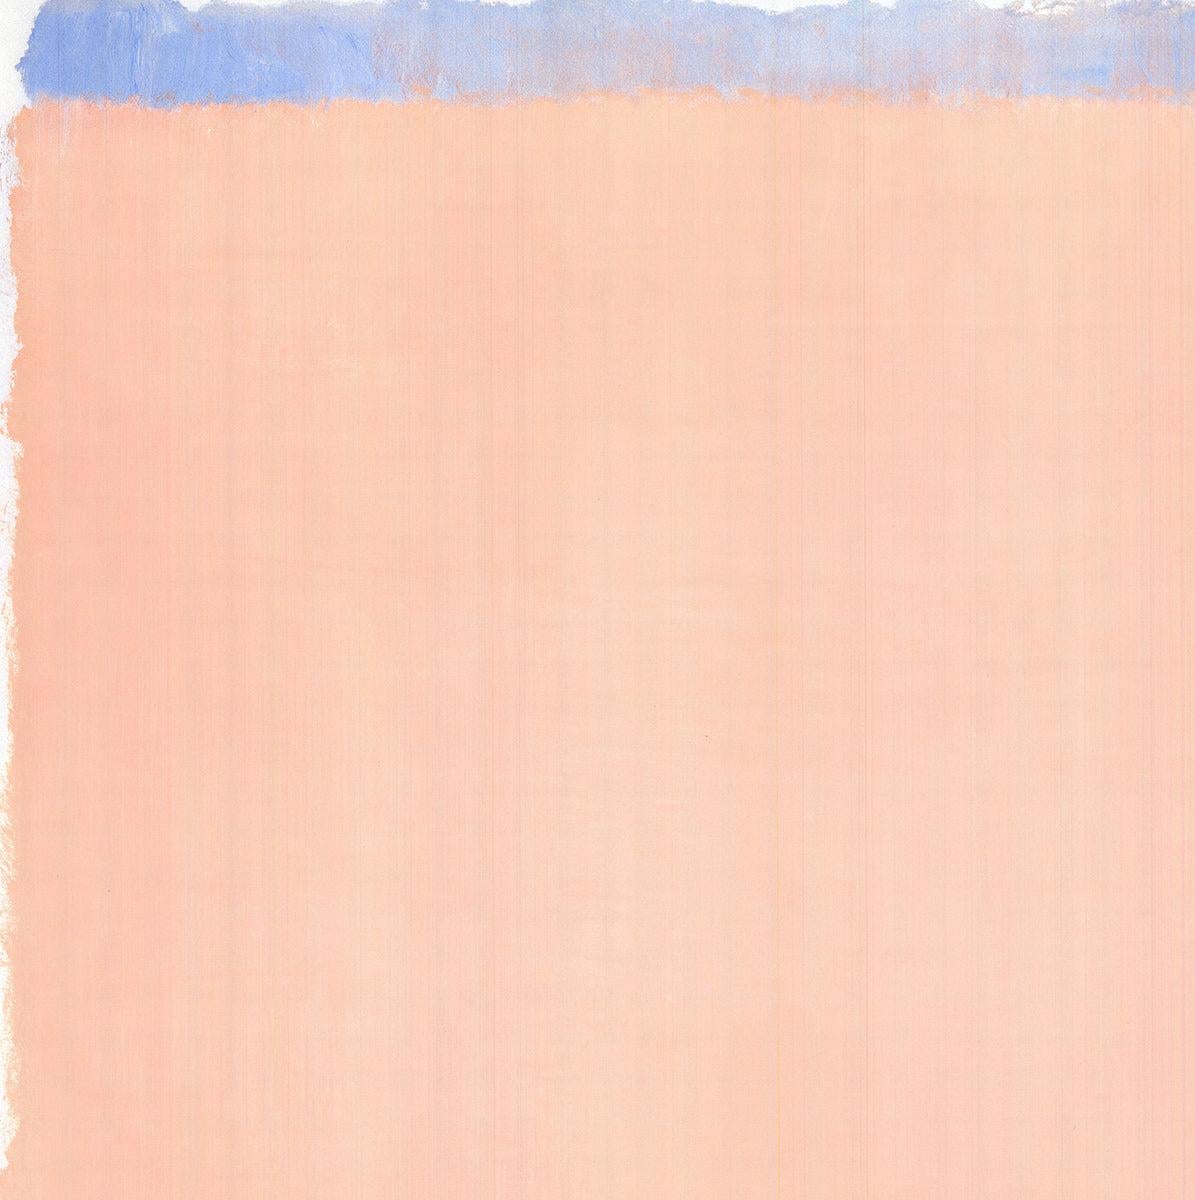 Mark Rothko « Untitled, 1969 » 1998- Lithographie offset en vente 2